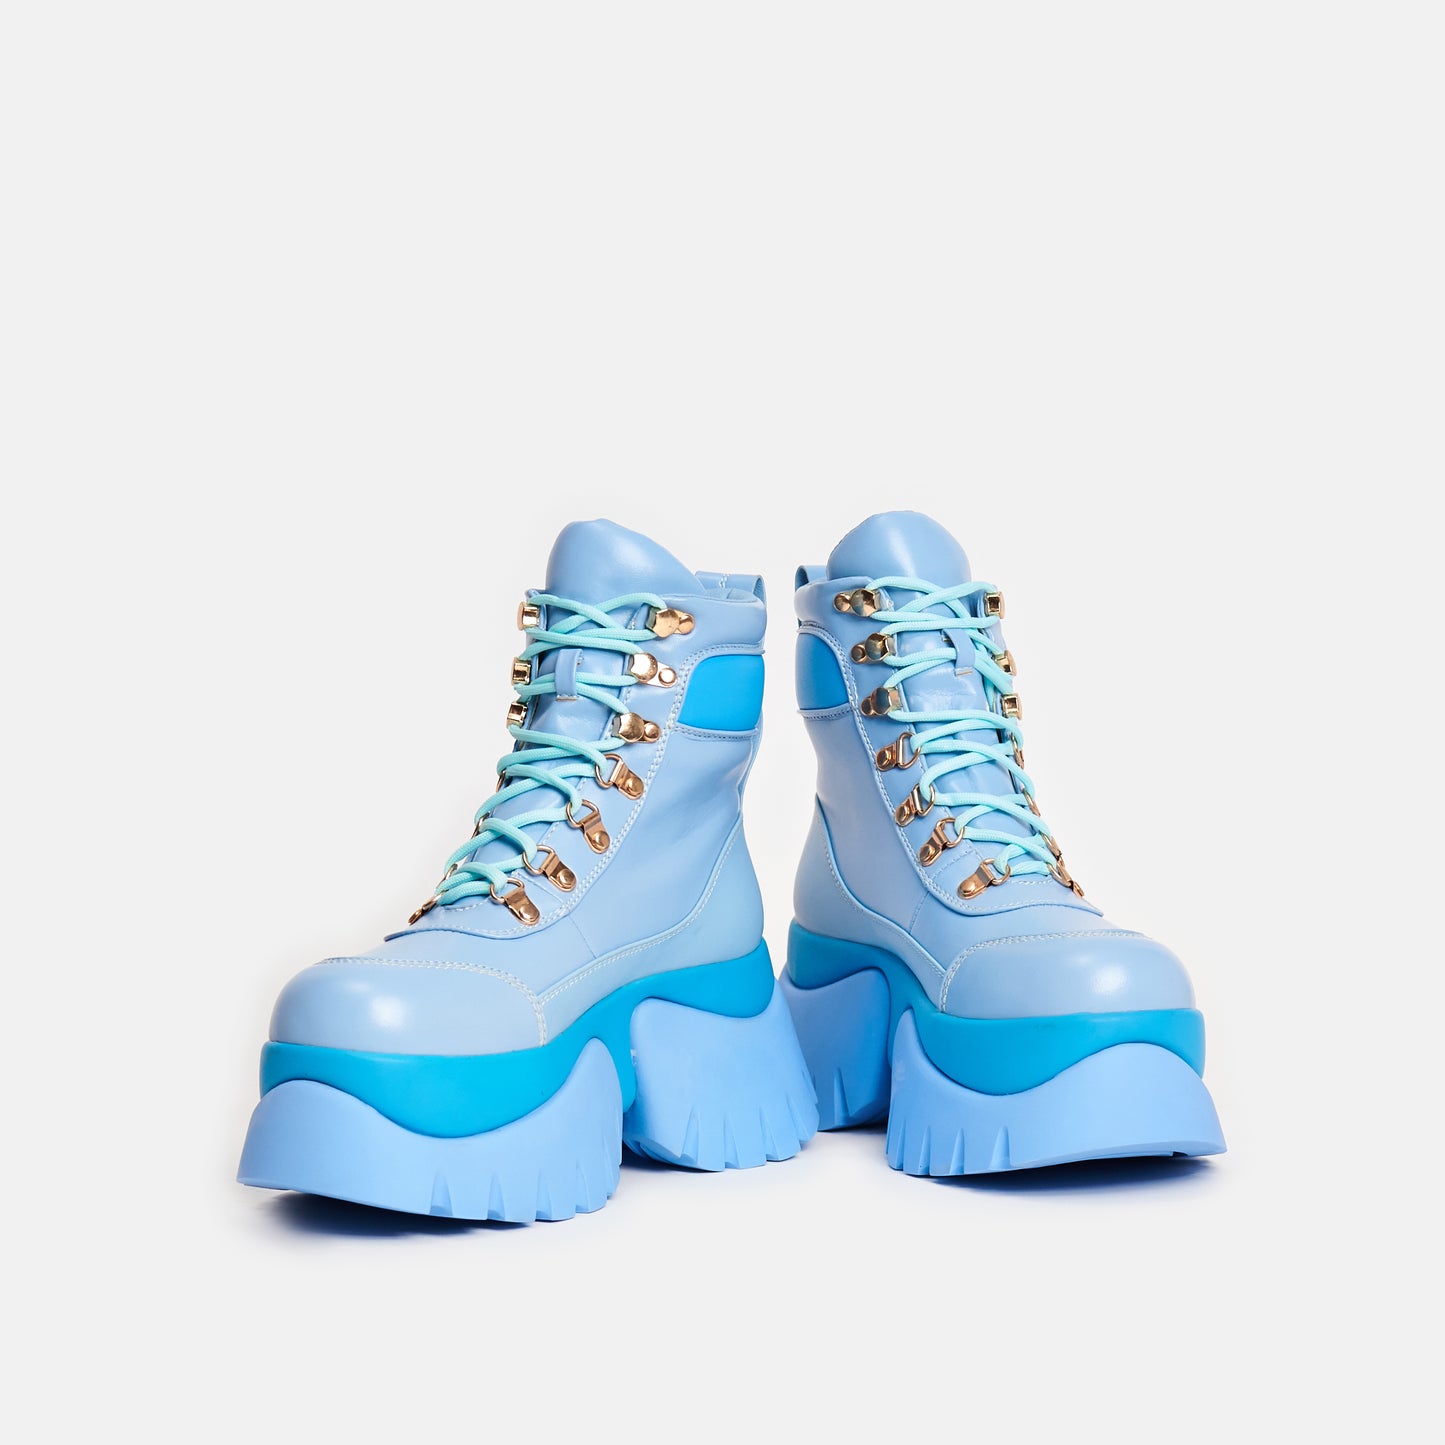 Crybaby Blue Vilun Platform Boots - Ankle Boots - KOI Footwear - Blue - Front View